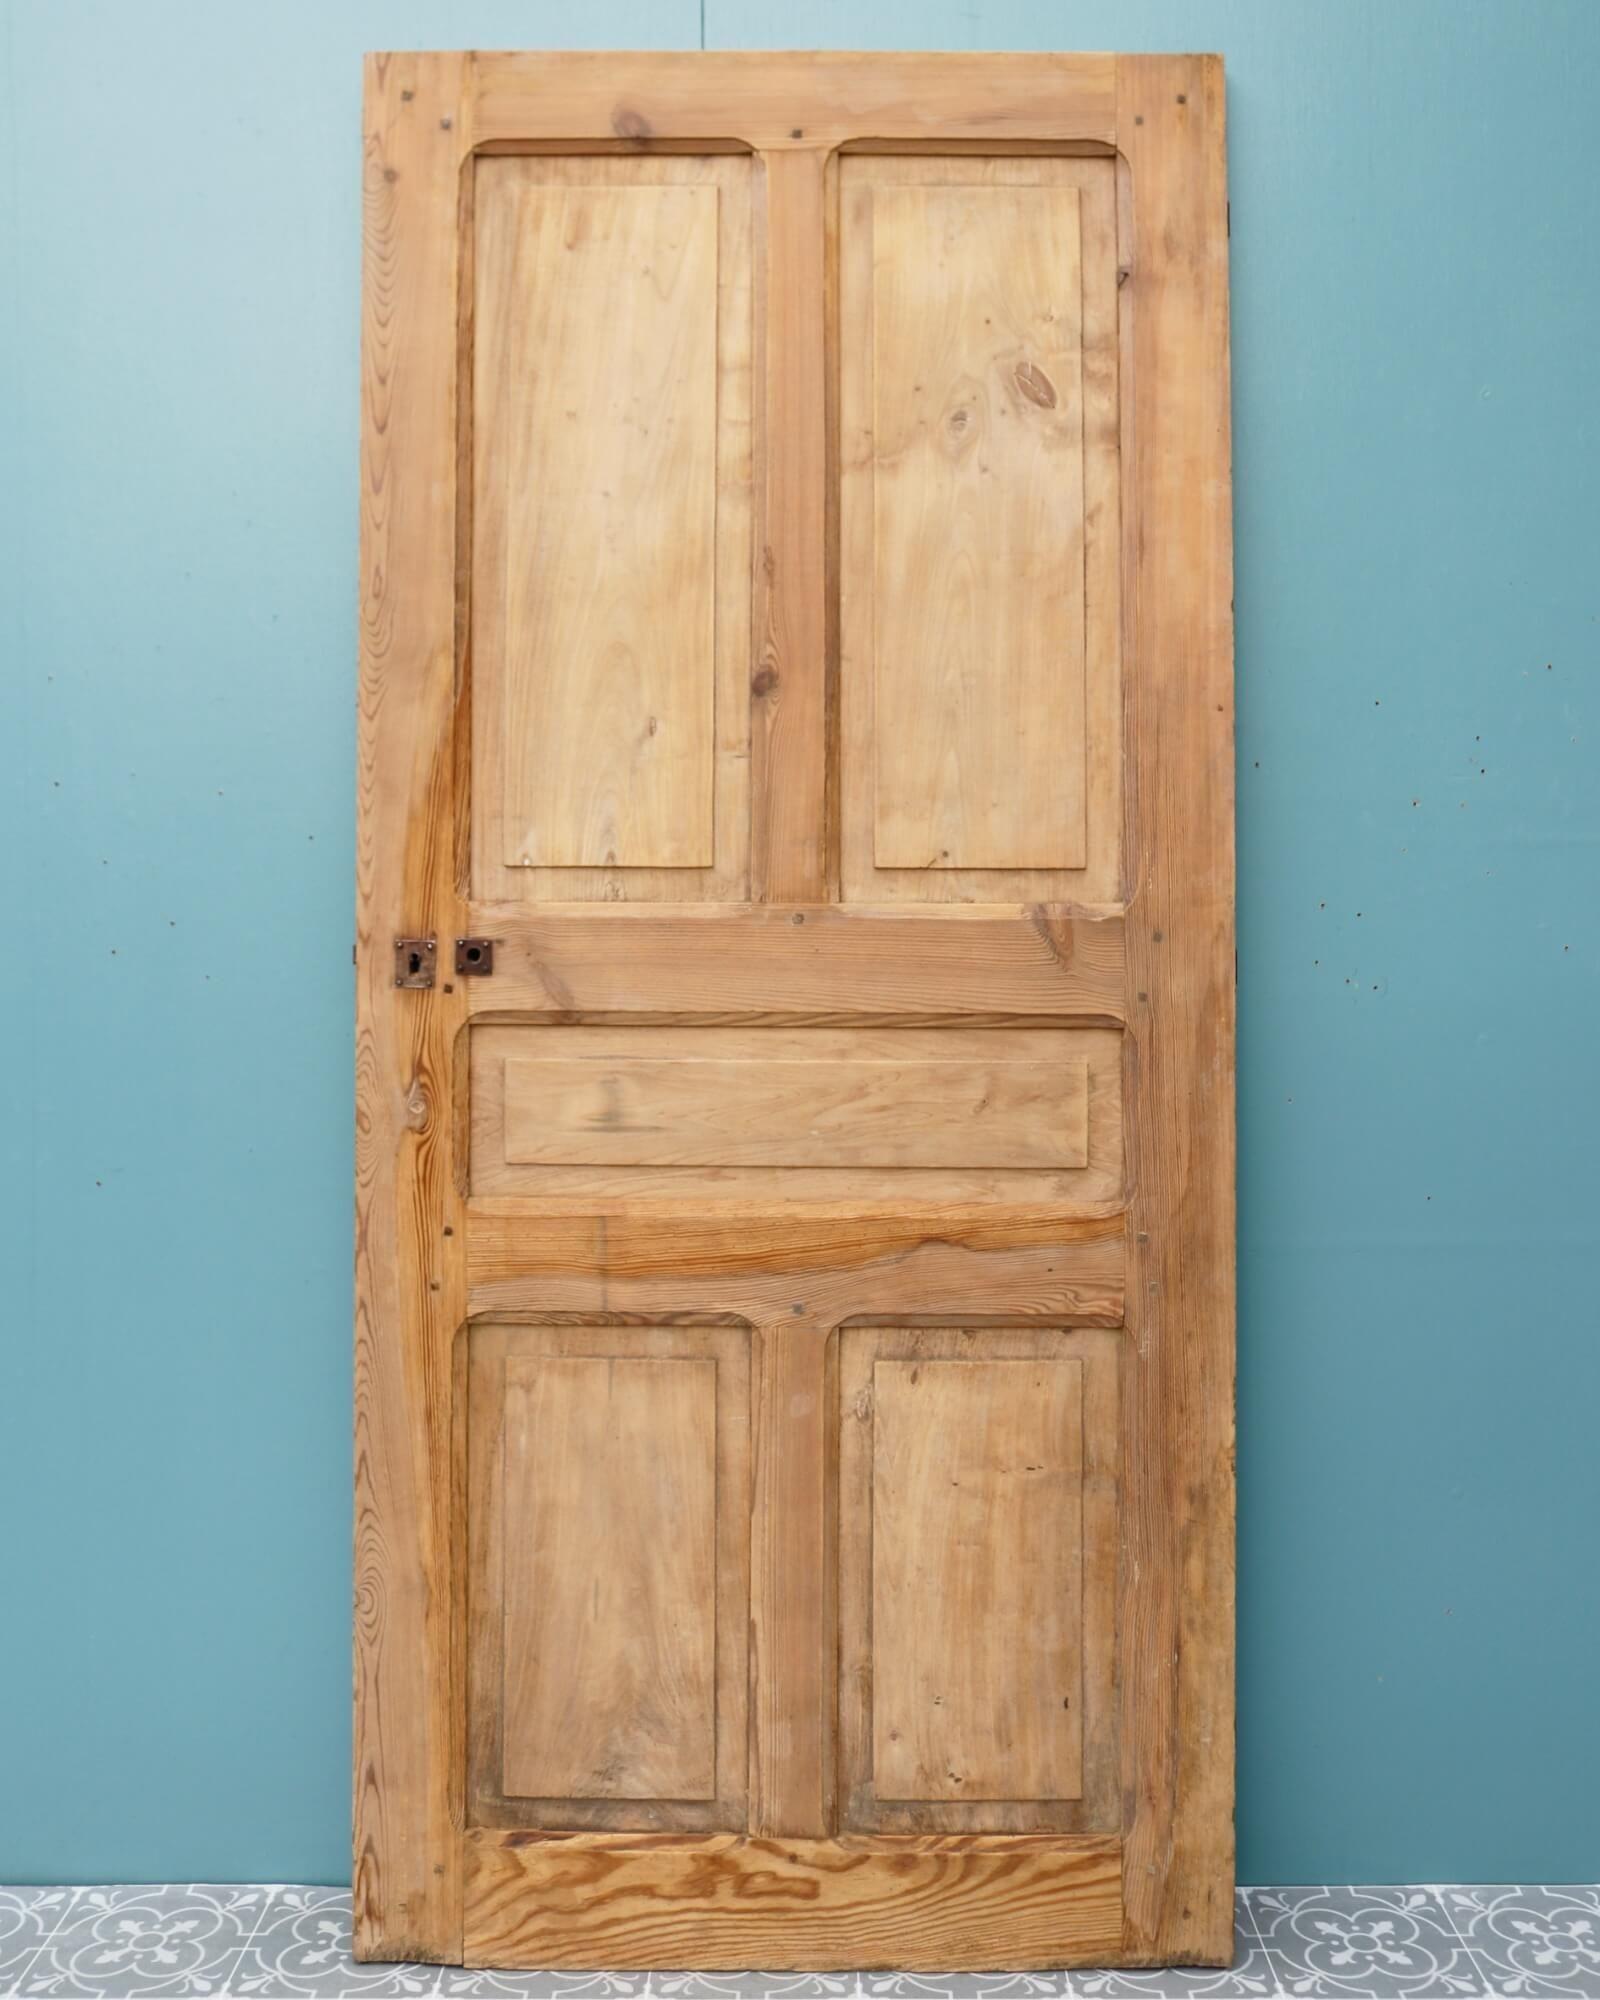 Dating from the 1870s, this French country style interior door looks beautiful in a country kitchen or rustic farmhouse setting. It is made in pine with walnut panels and has a stripped finish, highlighting the natural woodgrain and characterful